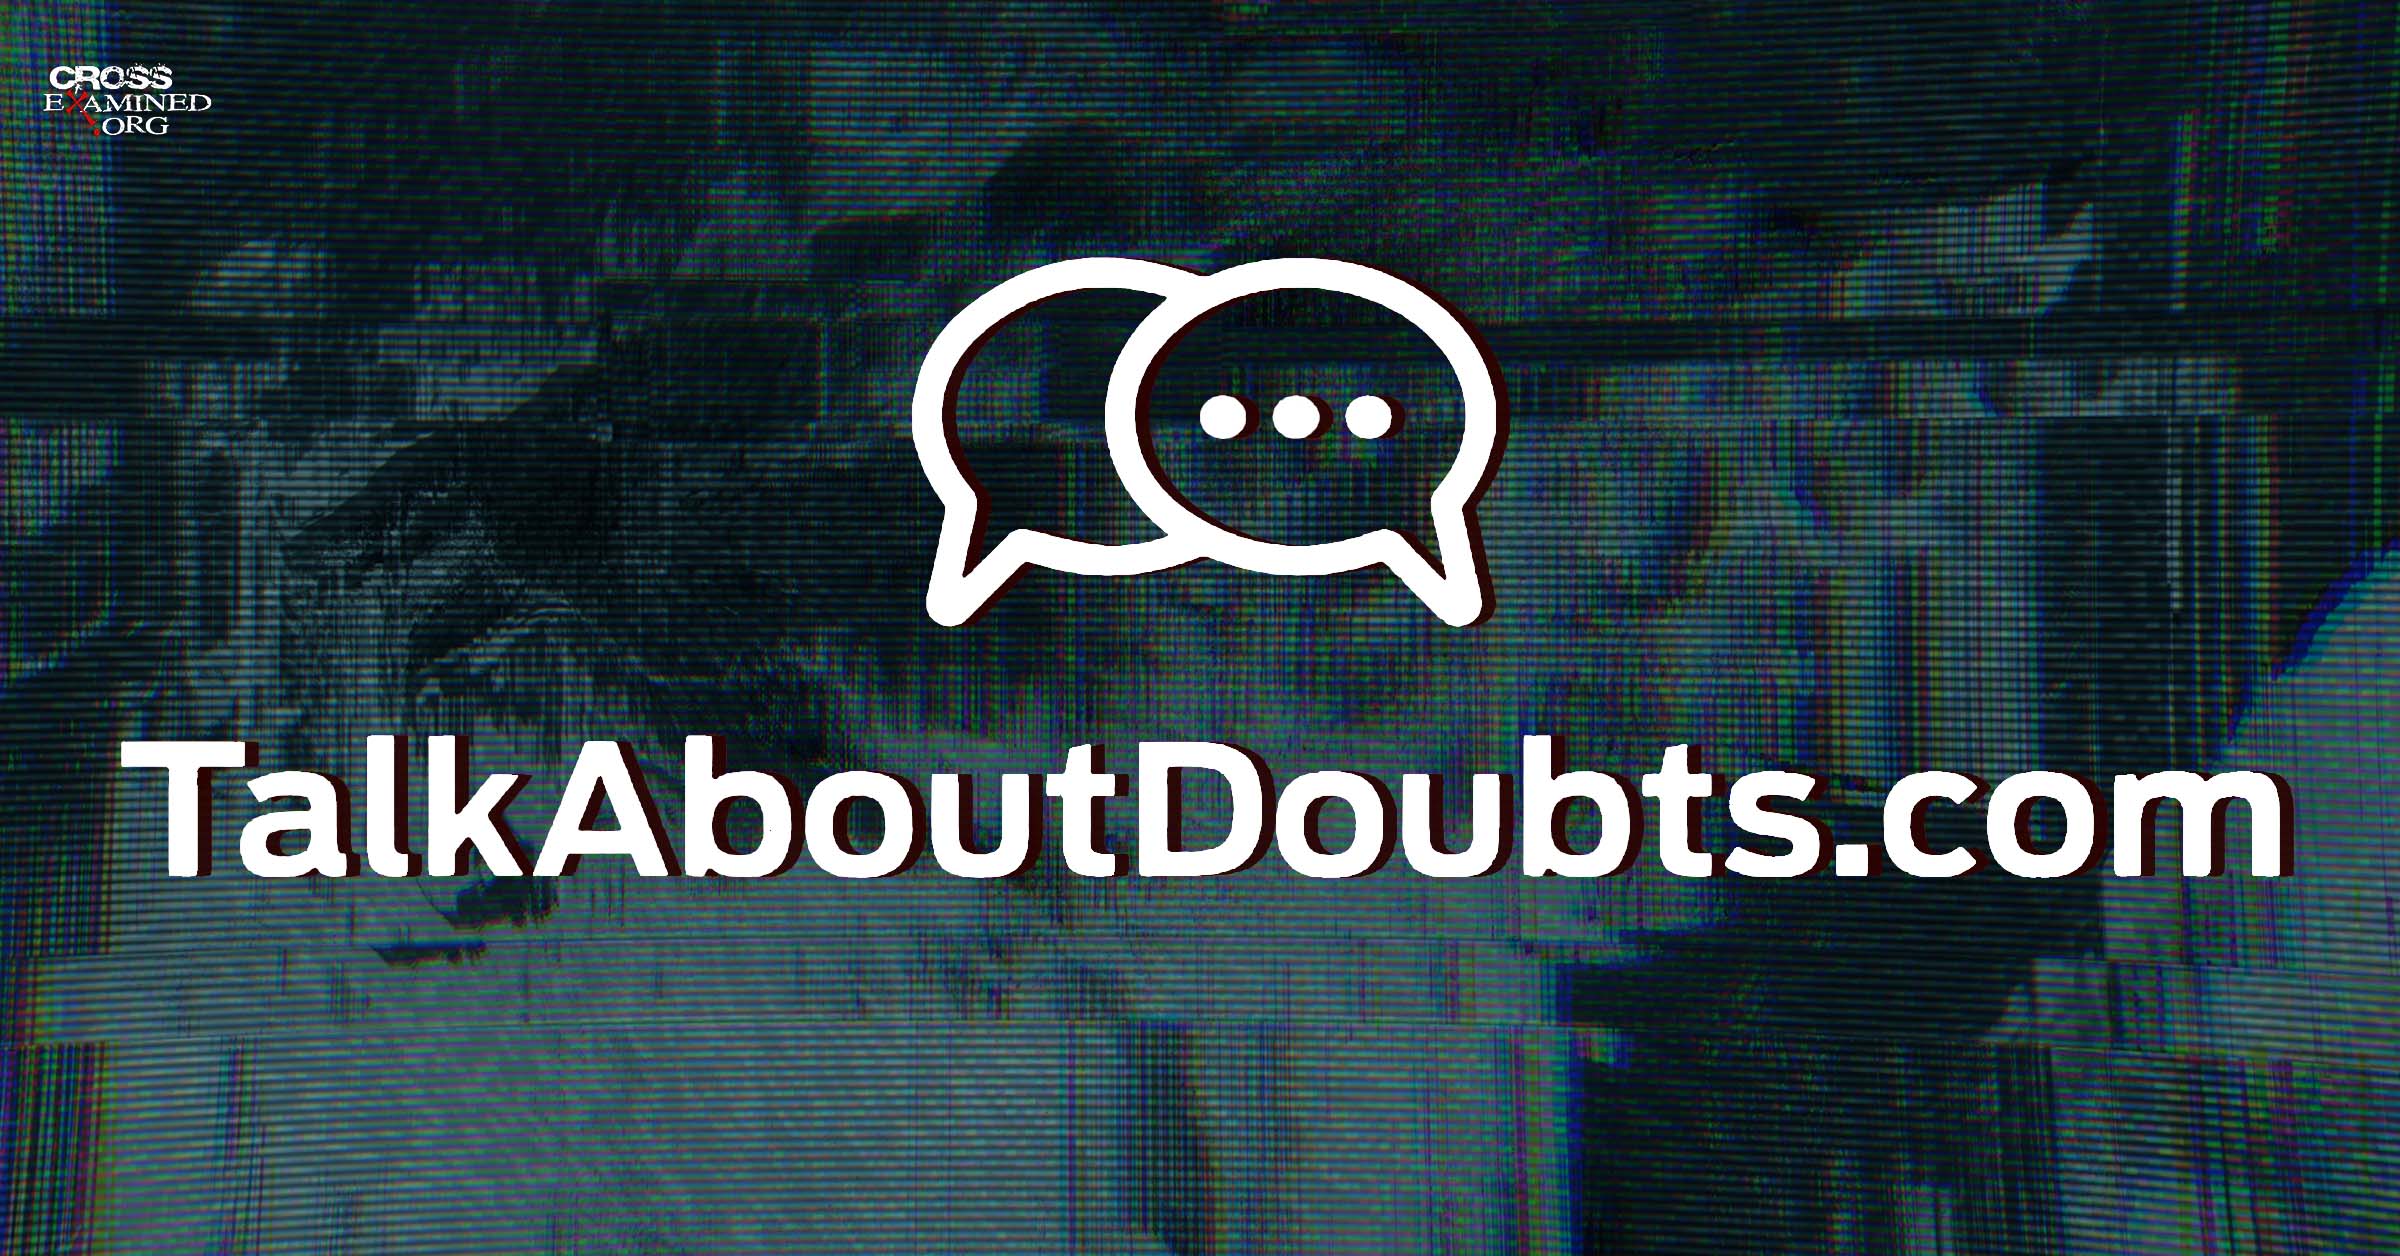 Doubting Your Faith? Look No Further Than This New Free Resource